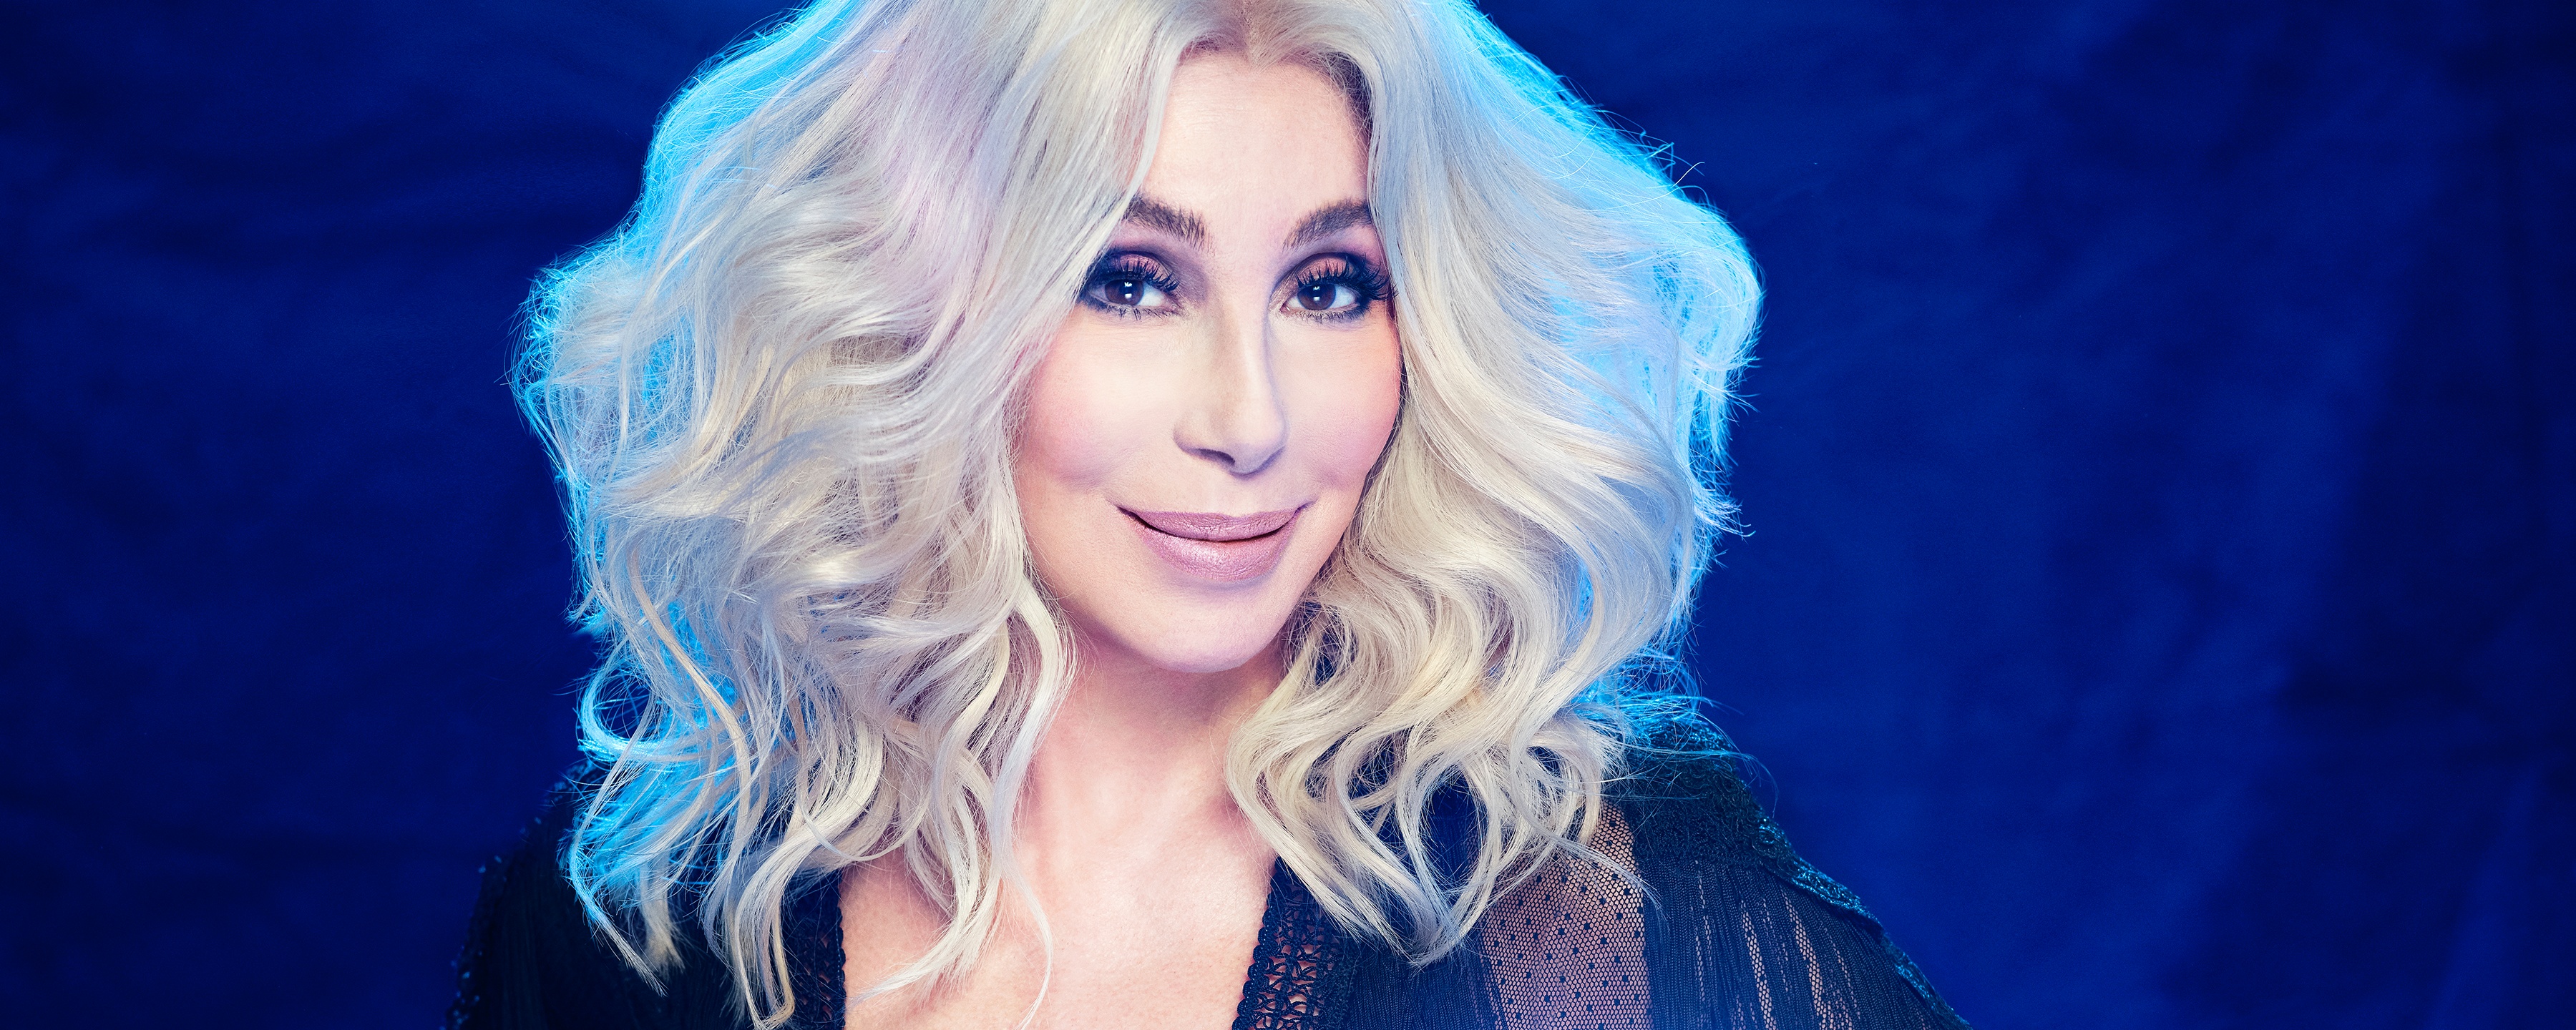 Cher’s Interesting 2021: Supporting Britney Spears, Getting Political, Livestreaming, Suing Sonny Bono’s Heirs and More